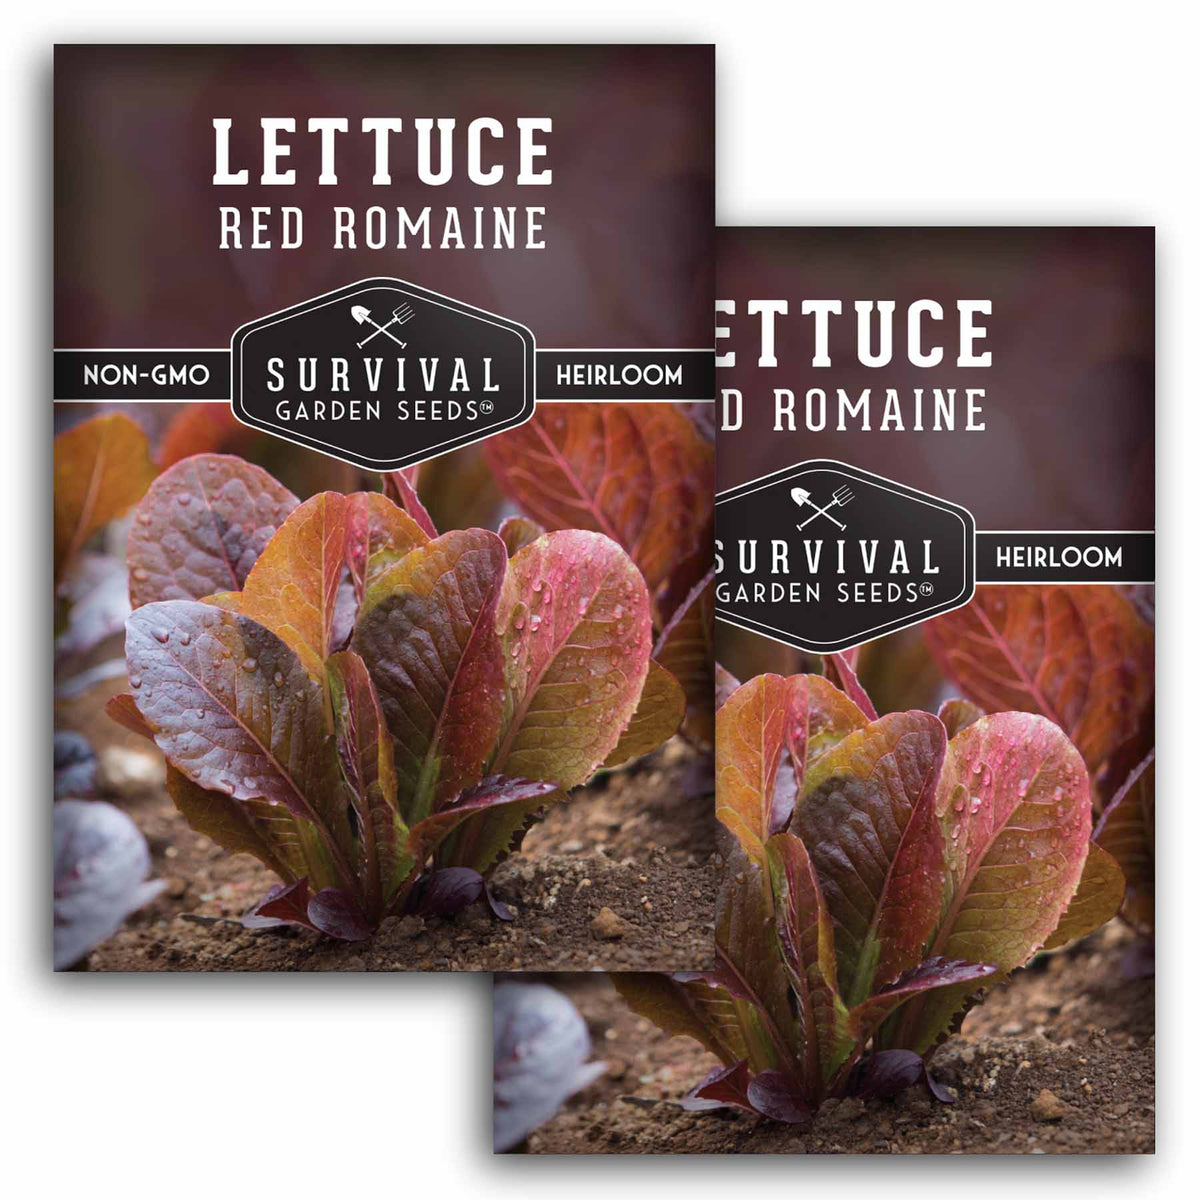 2 packets of Red Romaine Lettuce seeds